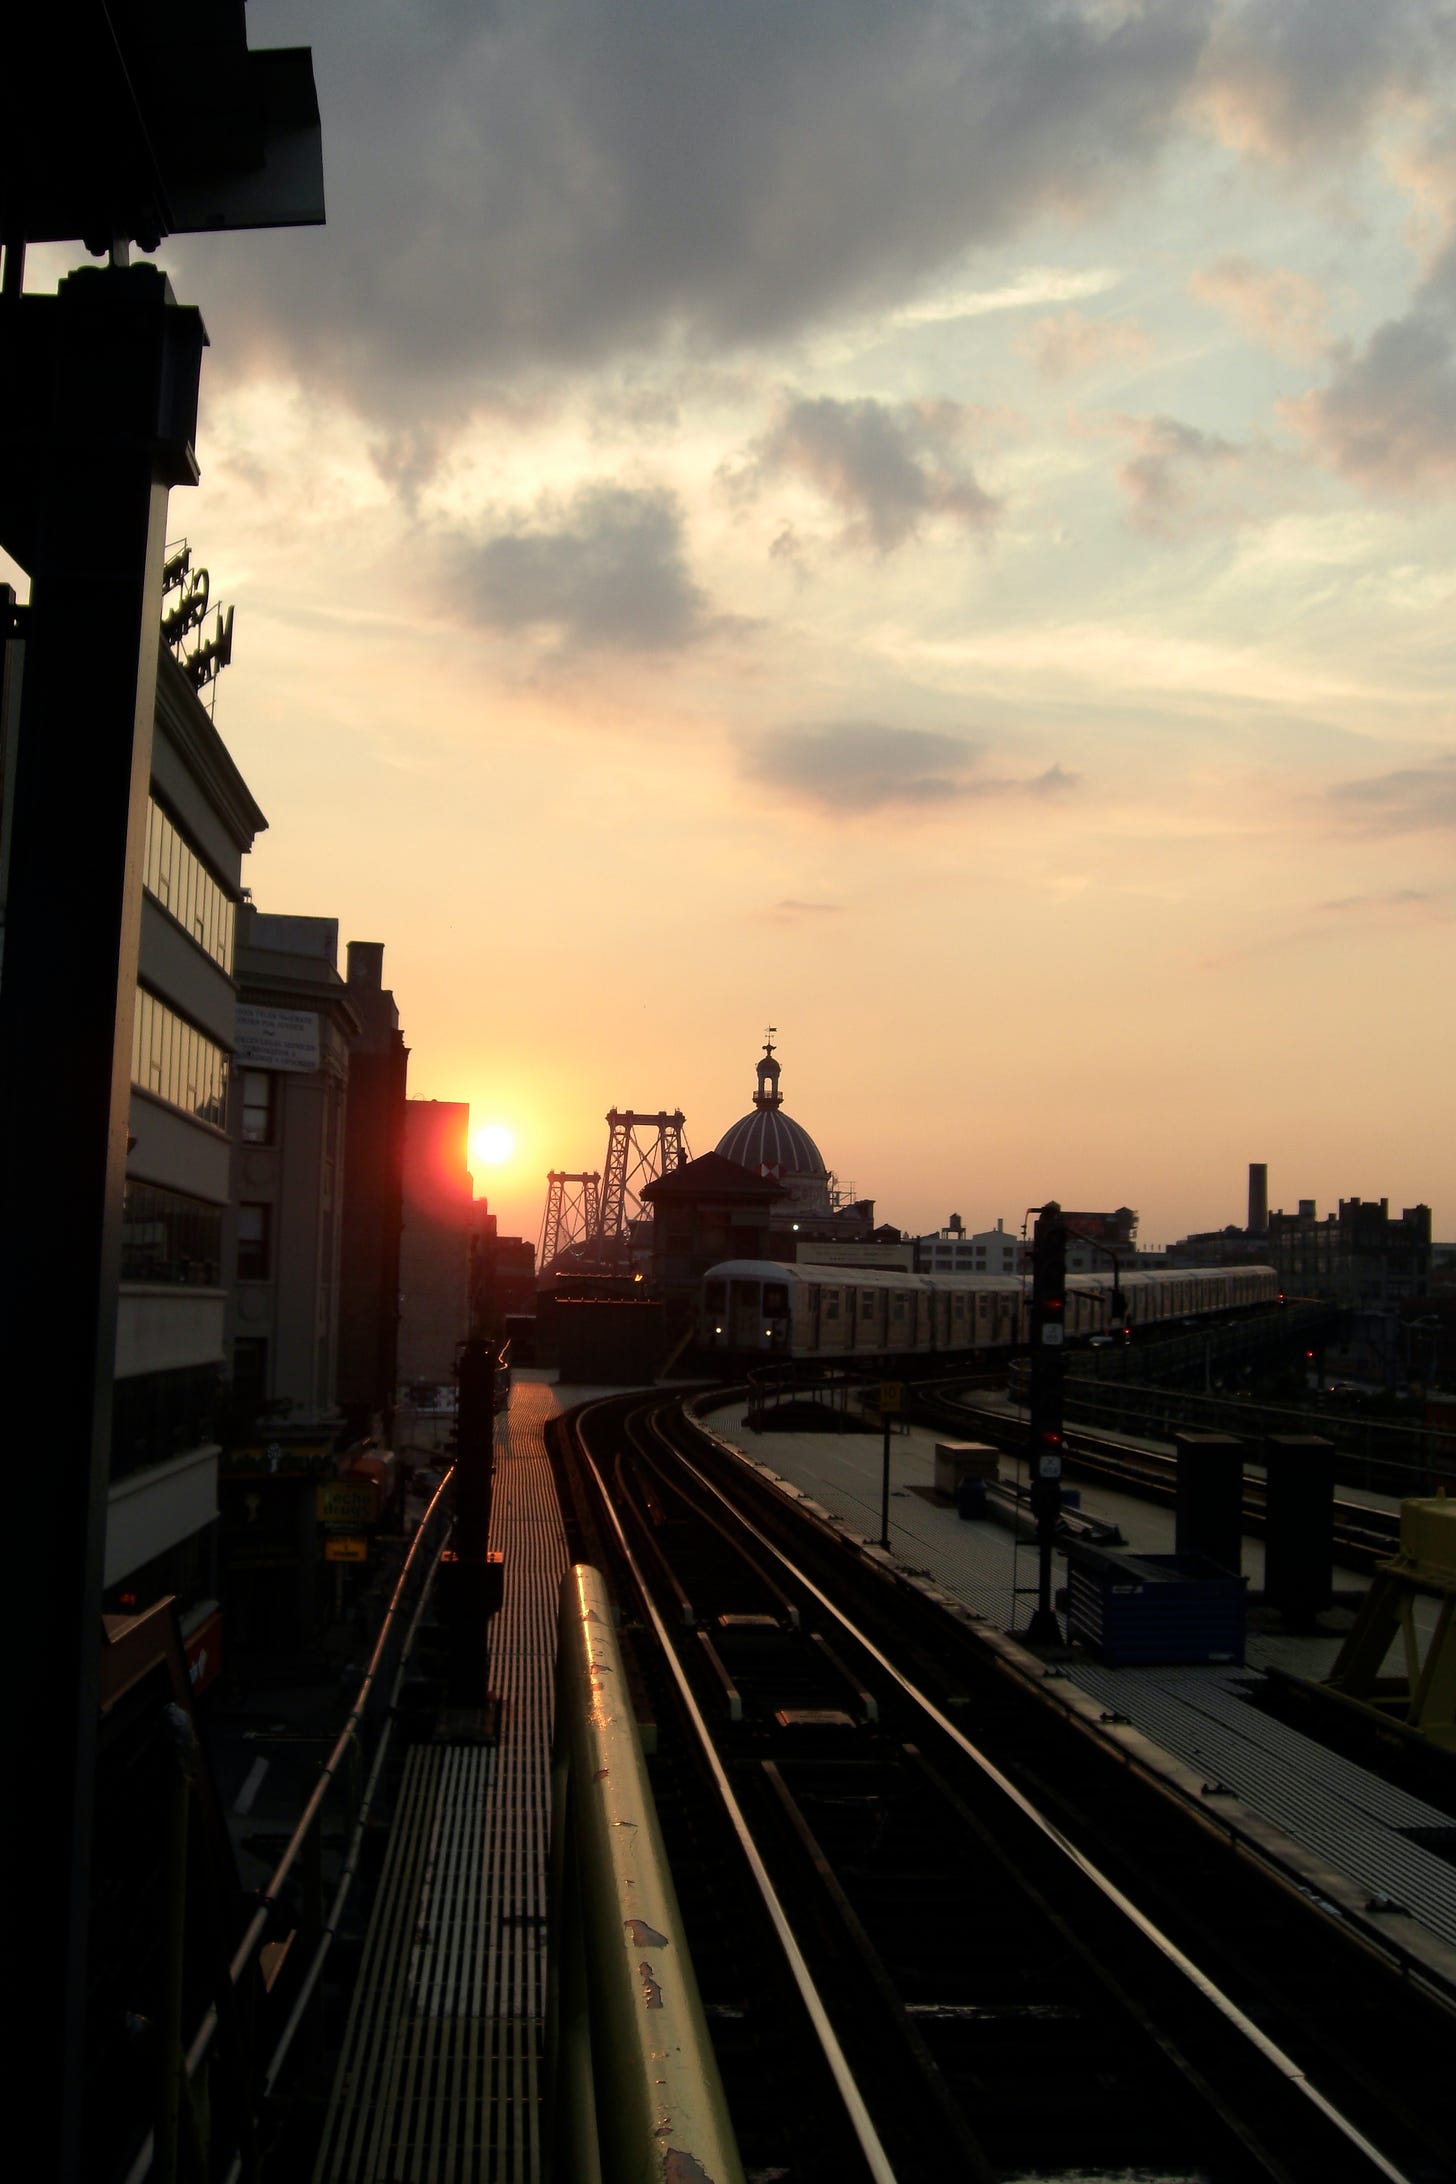 Photo of a train coming into a station at sunset.